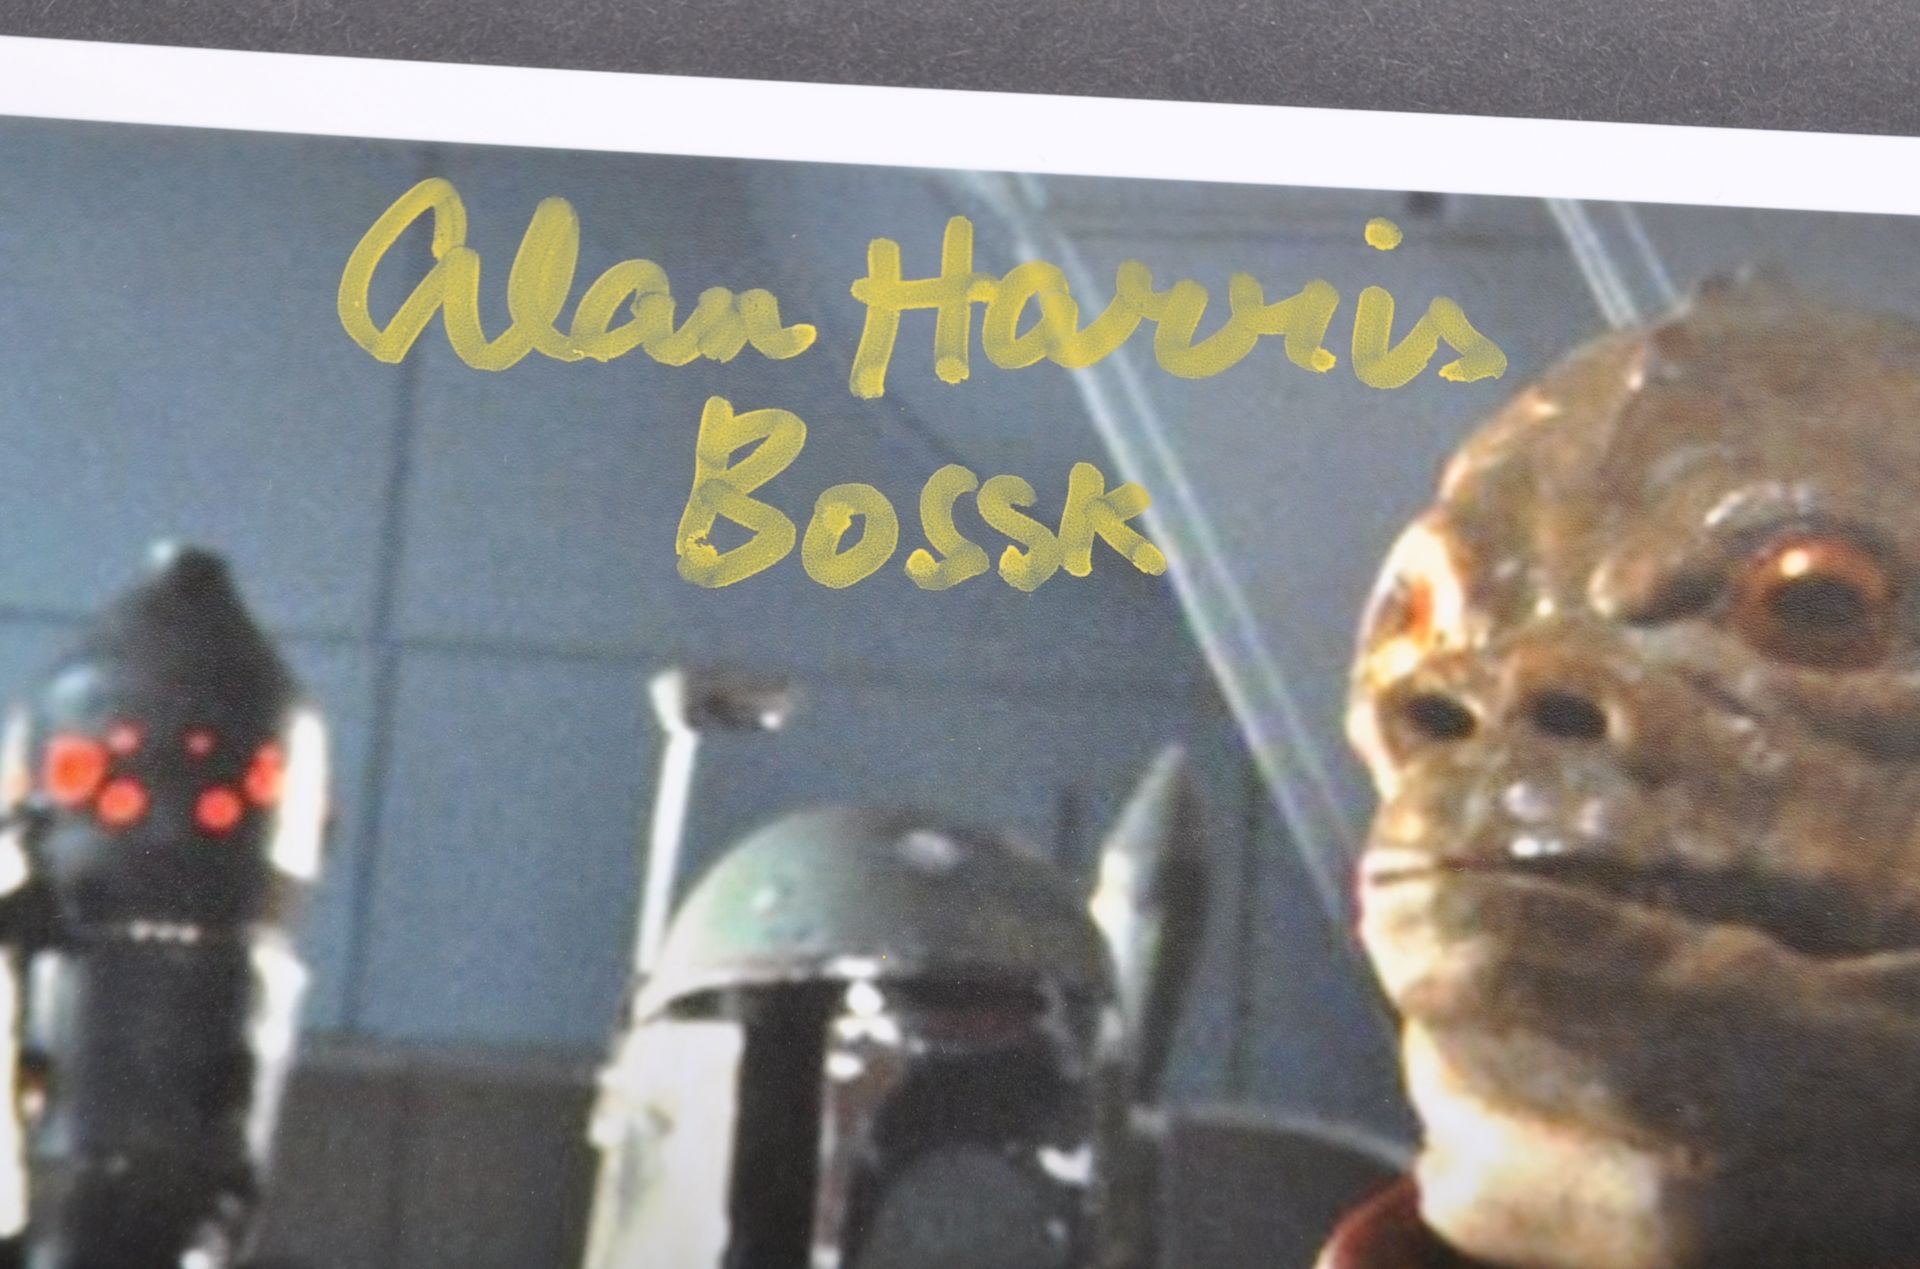 STAR WARS - ALAN HARRIS (BOSSK) - AUTOGRAPHED PHOTOGRAPH - Image 2 of 2